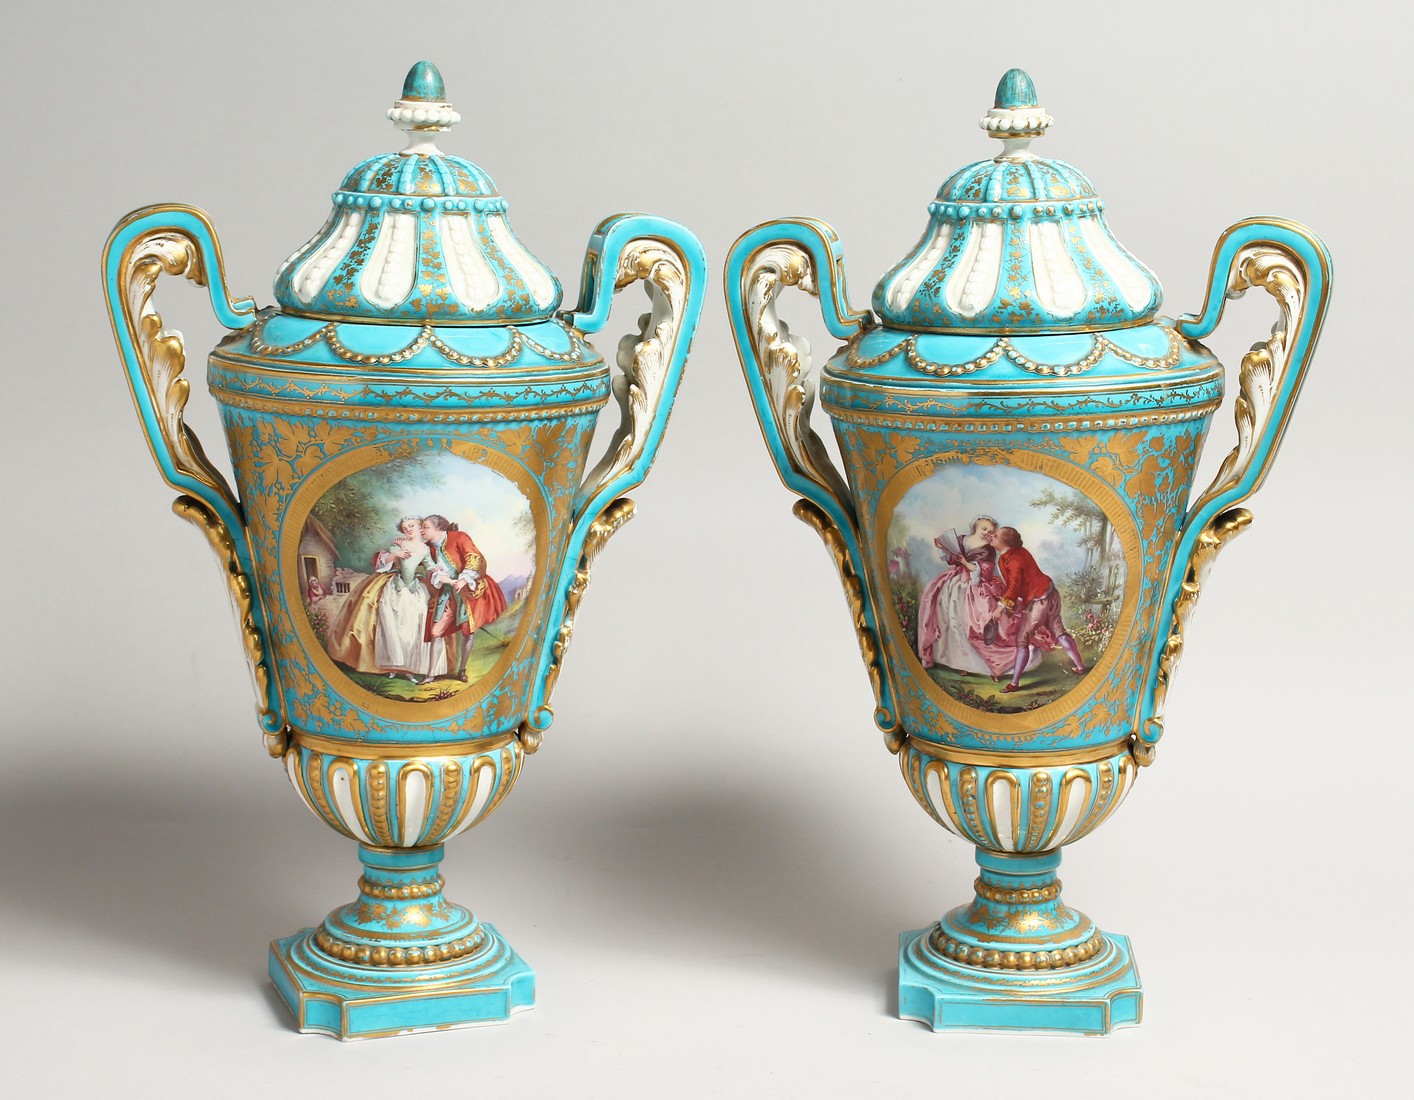 A SUPERB LARGE PAIR OF SEVRES PORCELAIN TWO HANDLED URN SHAPED VASES AND COVERS painted with reverse